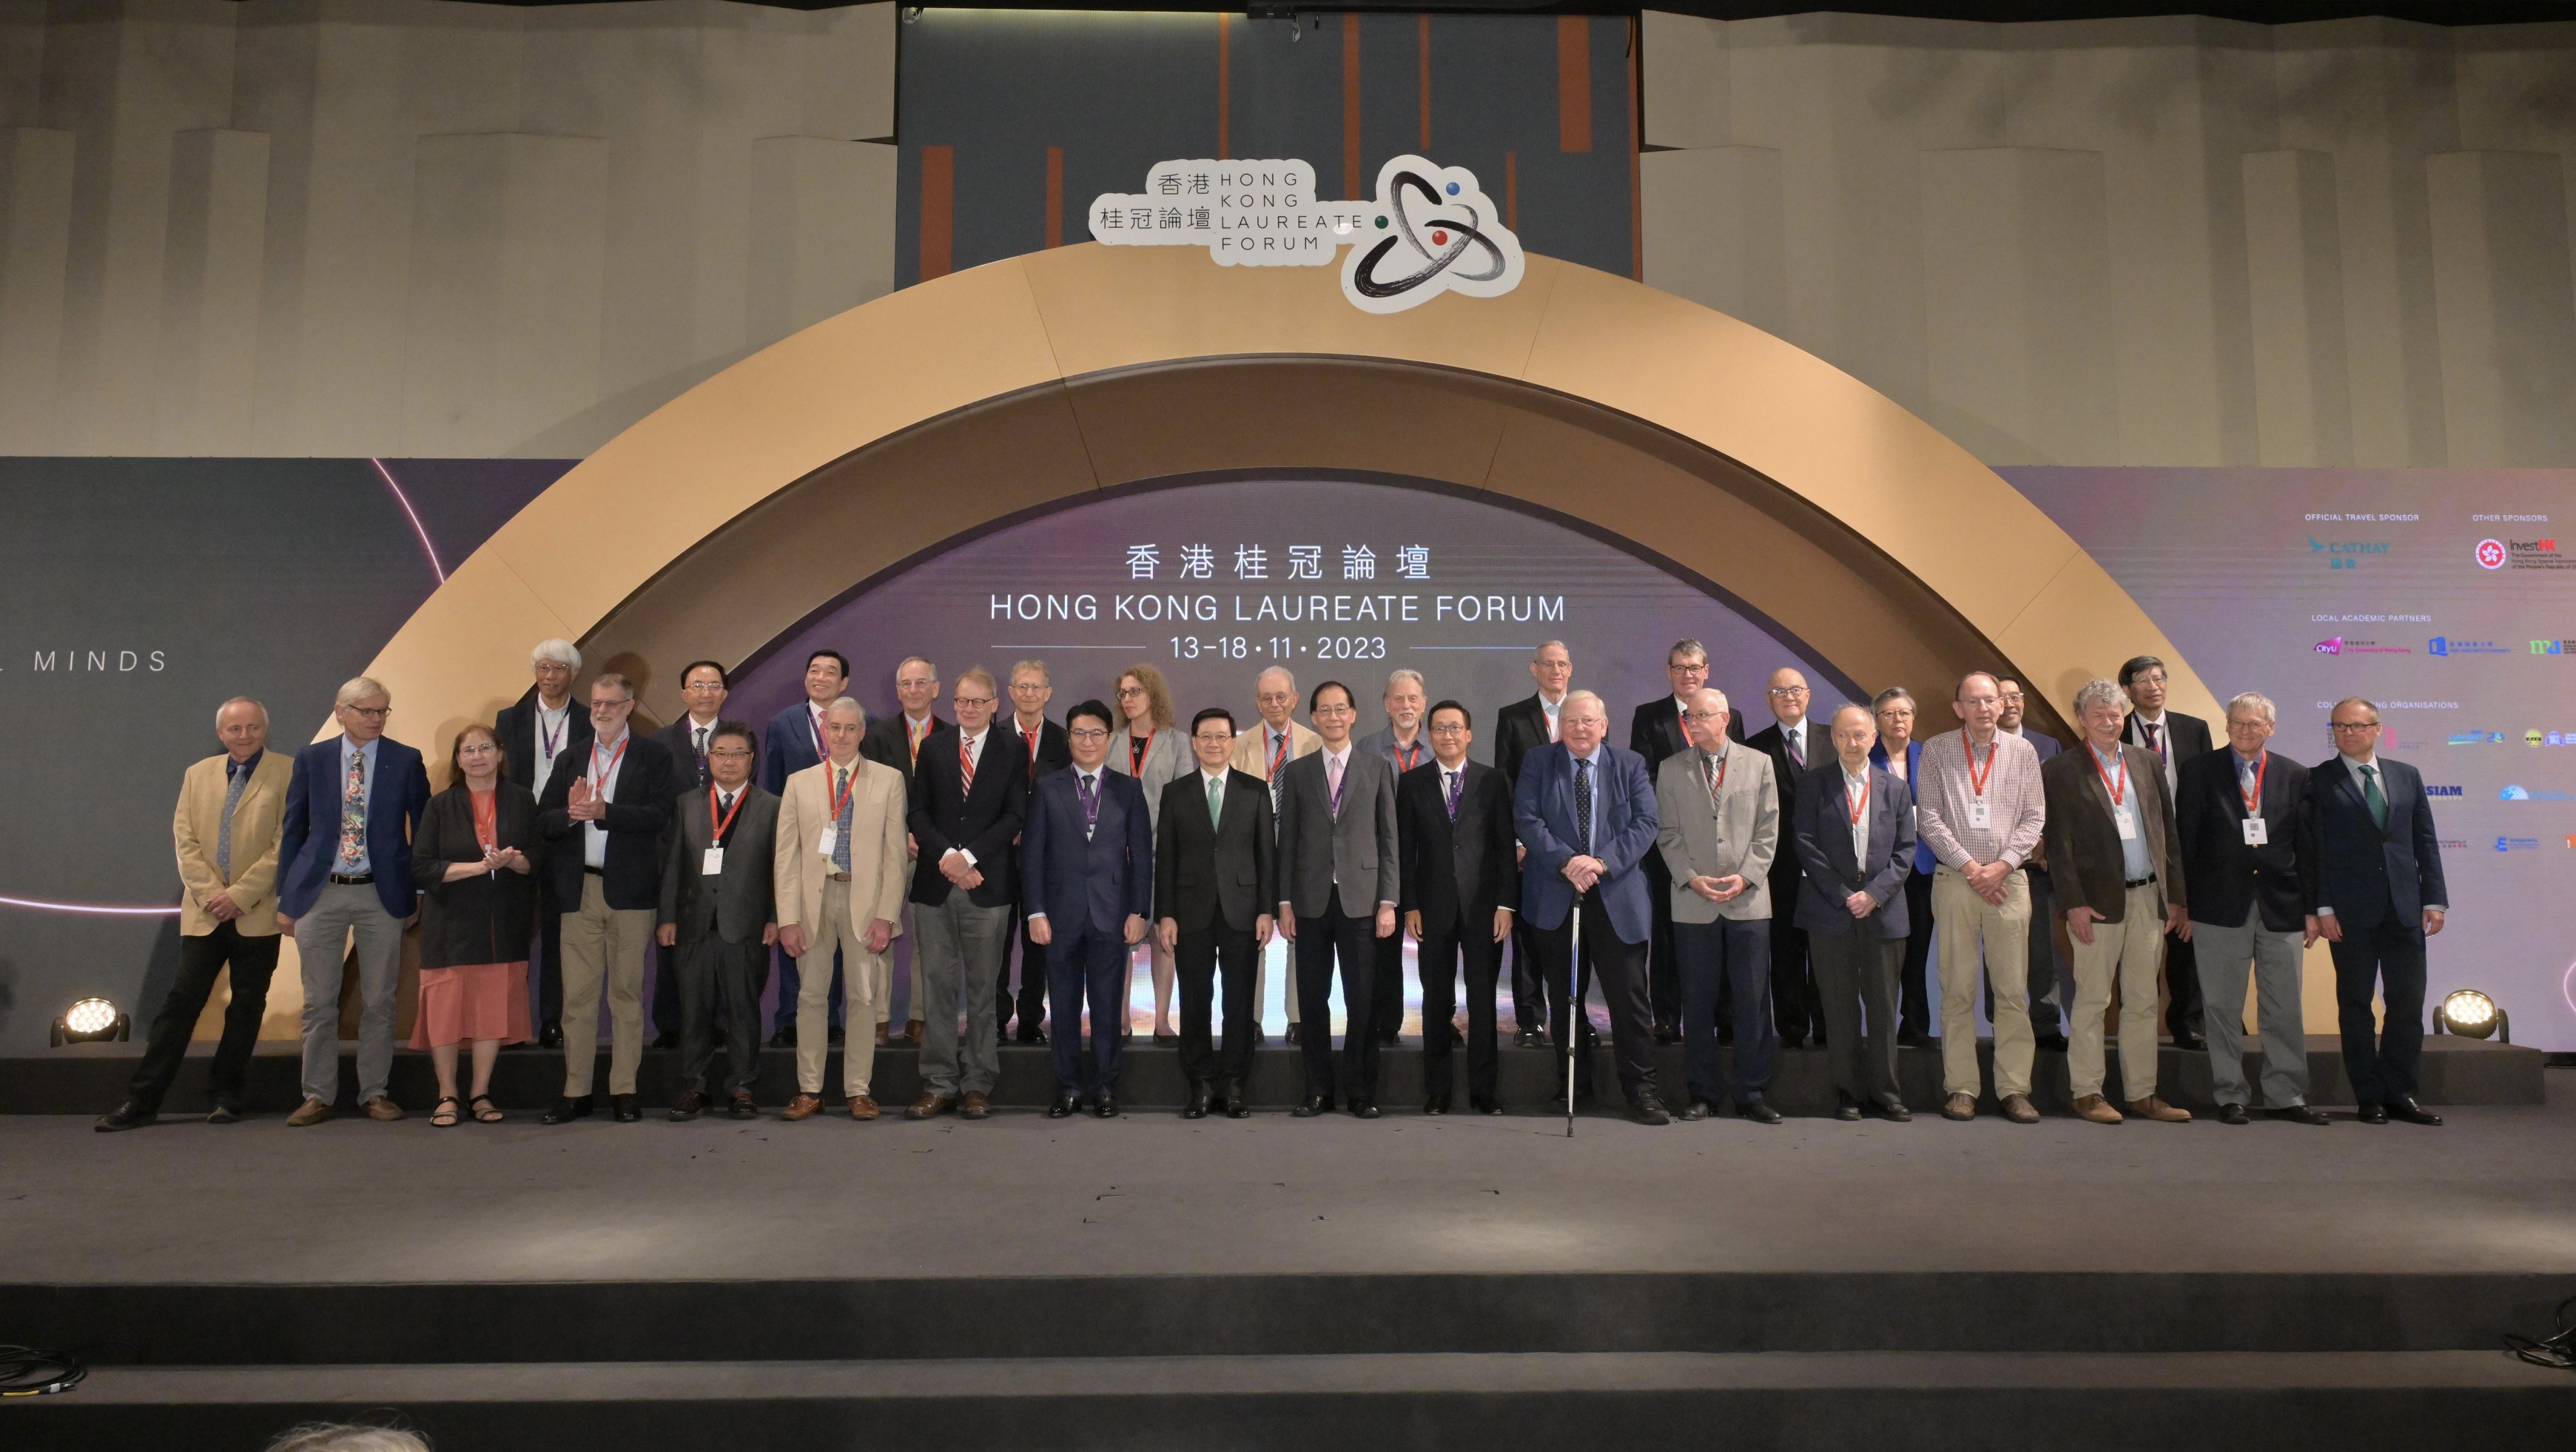 An inaugural high-level forum attended by 20 laureates and 200 young scientists from around the world kicks off in Hong Kong on Monday. Photo: SCMP